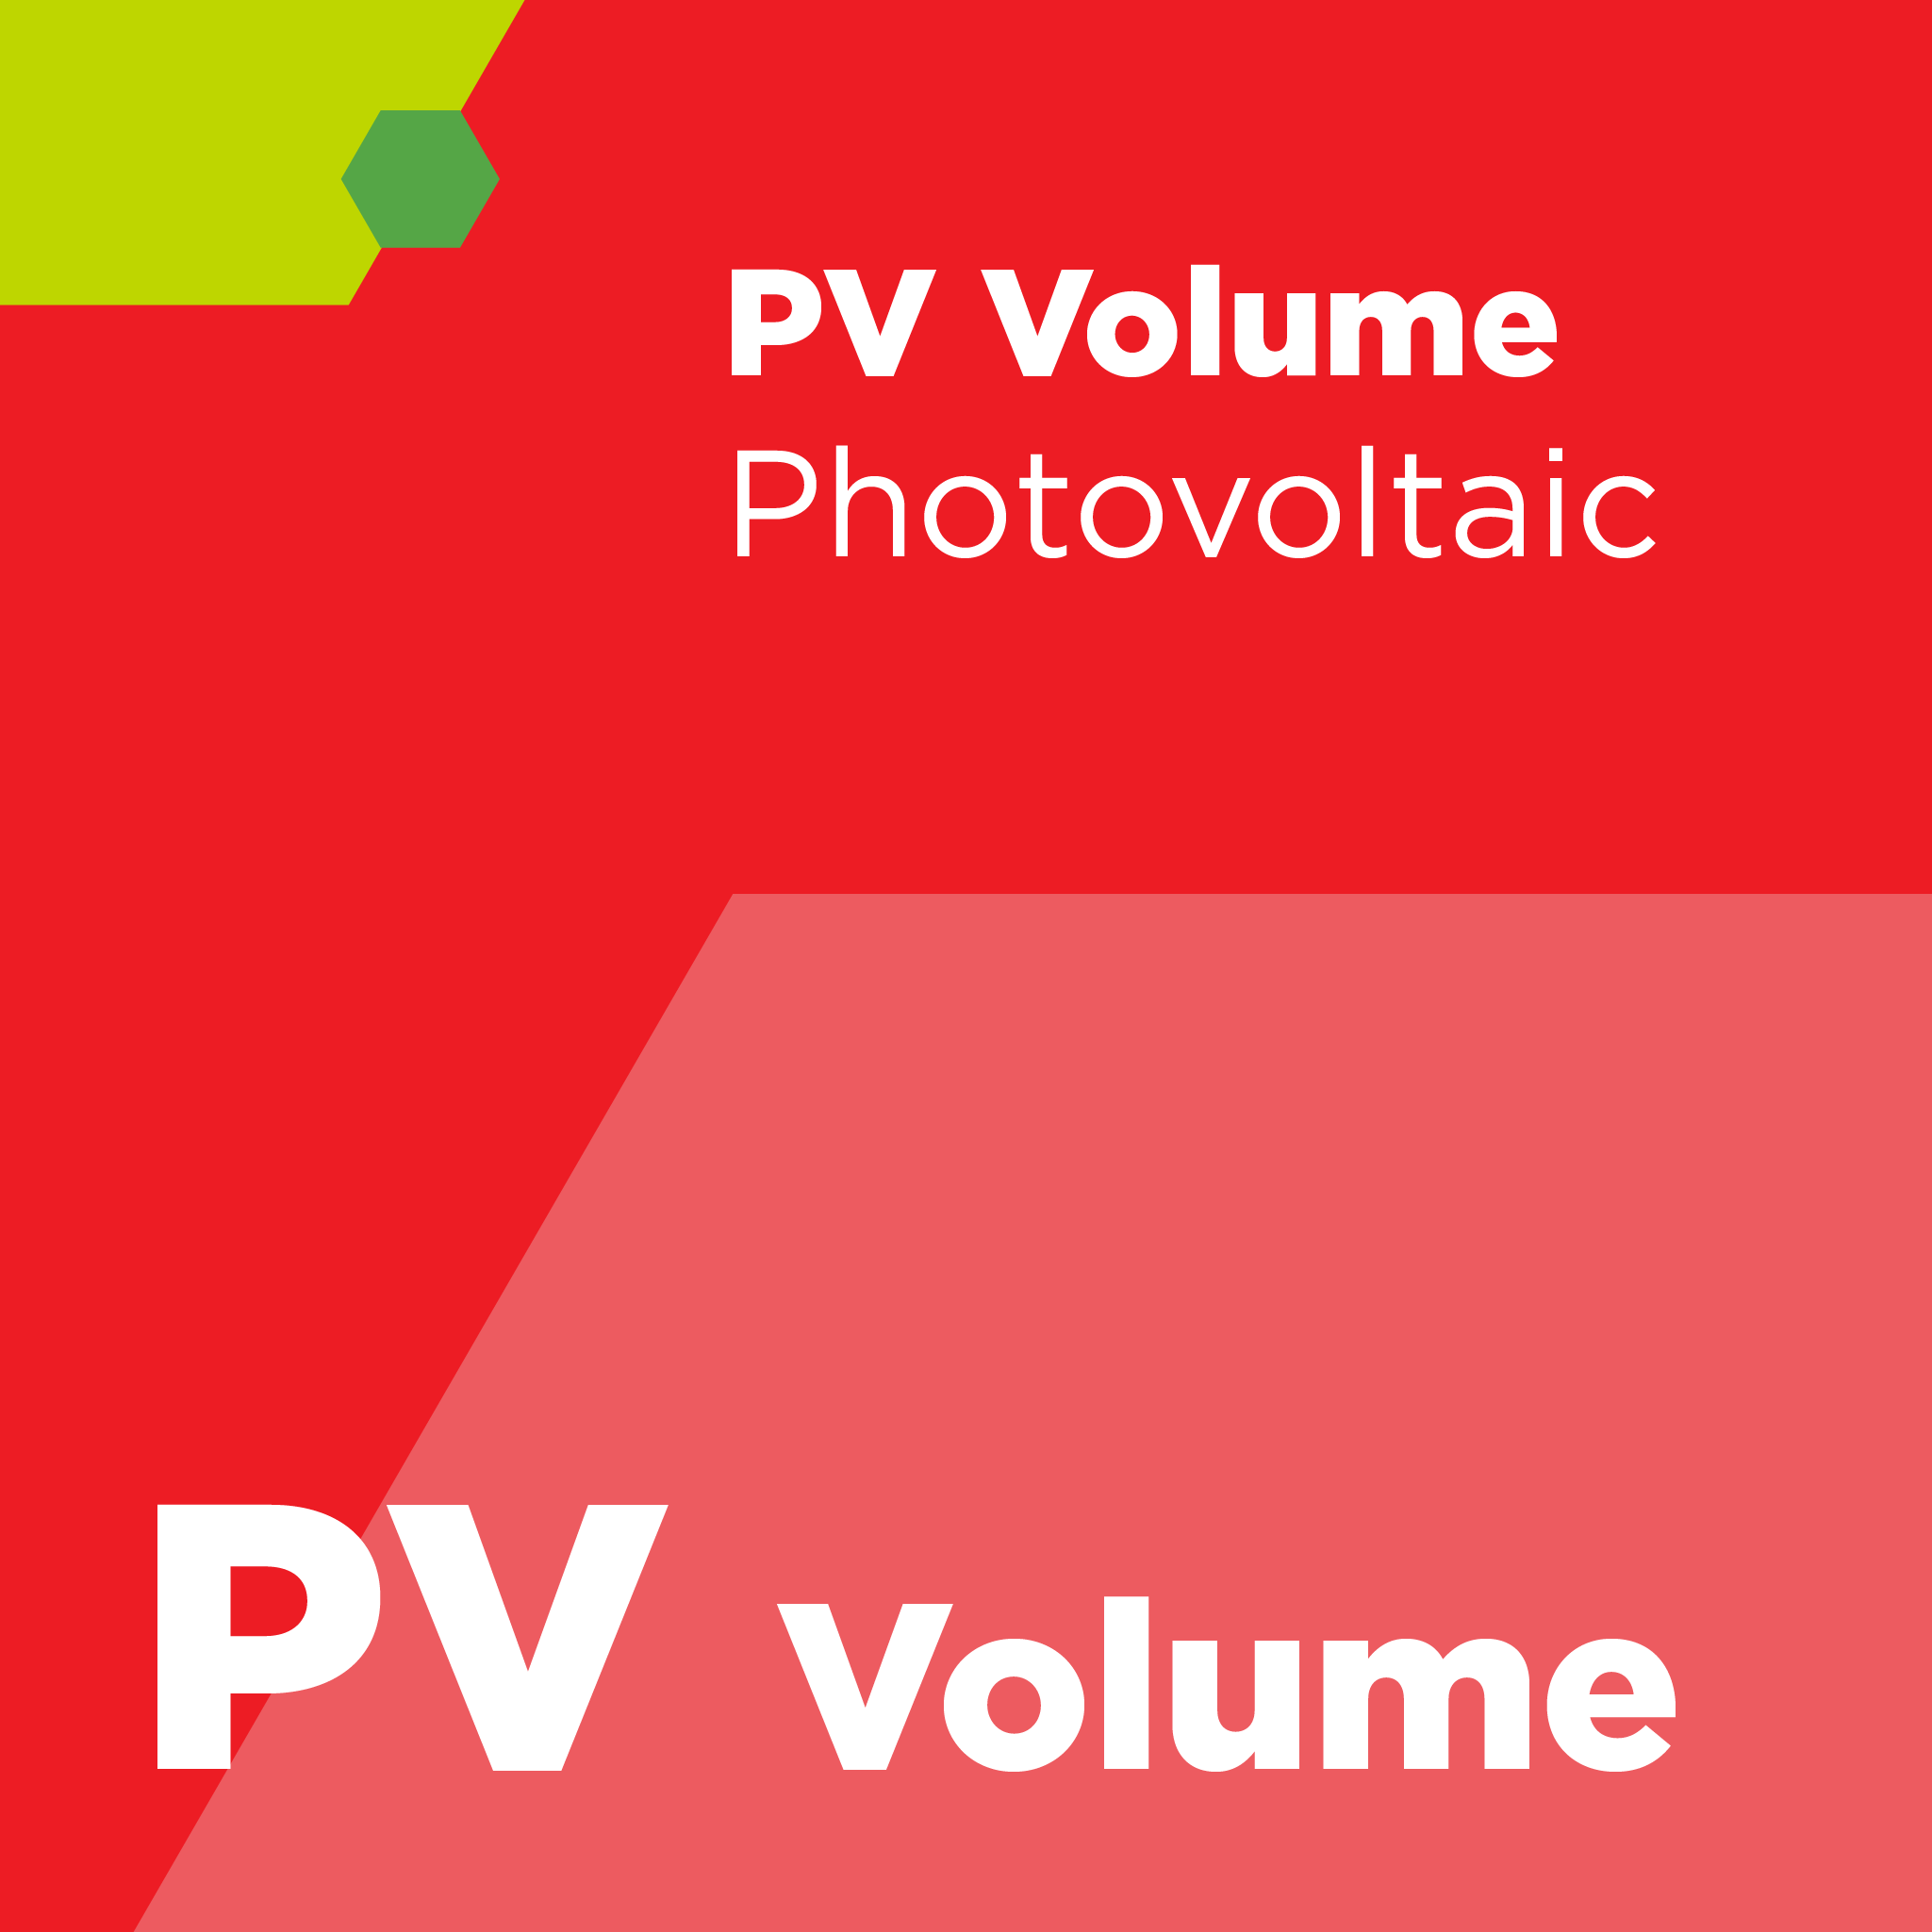 PV08600 - SEMI PV86 - Specification for Crystalline Silicon Photovoltaic Module Dimensions